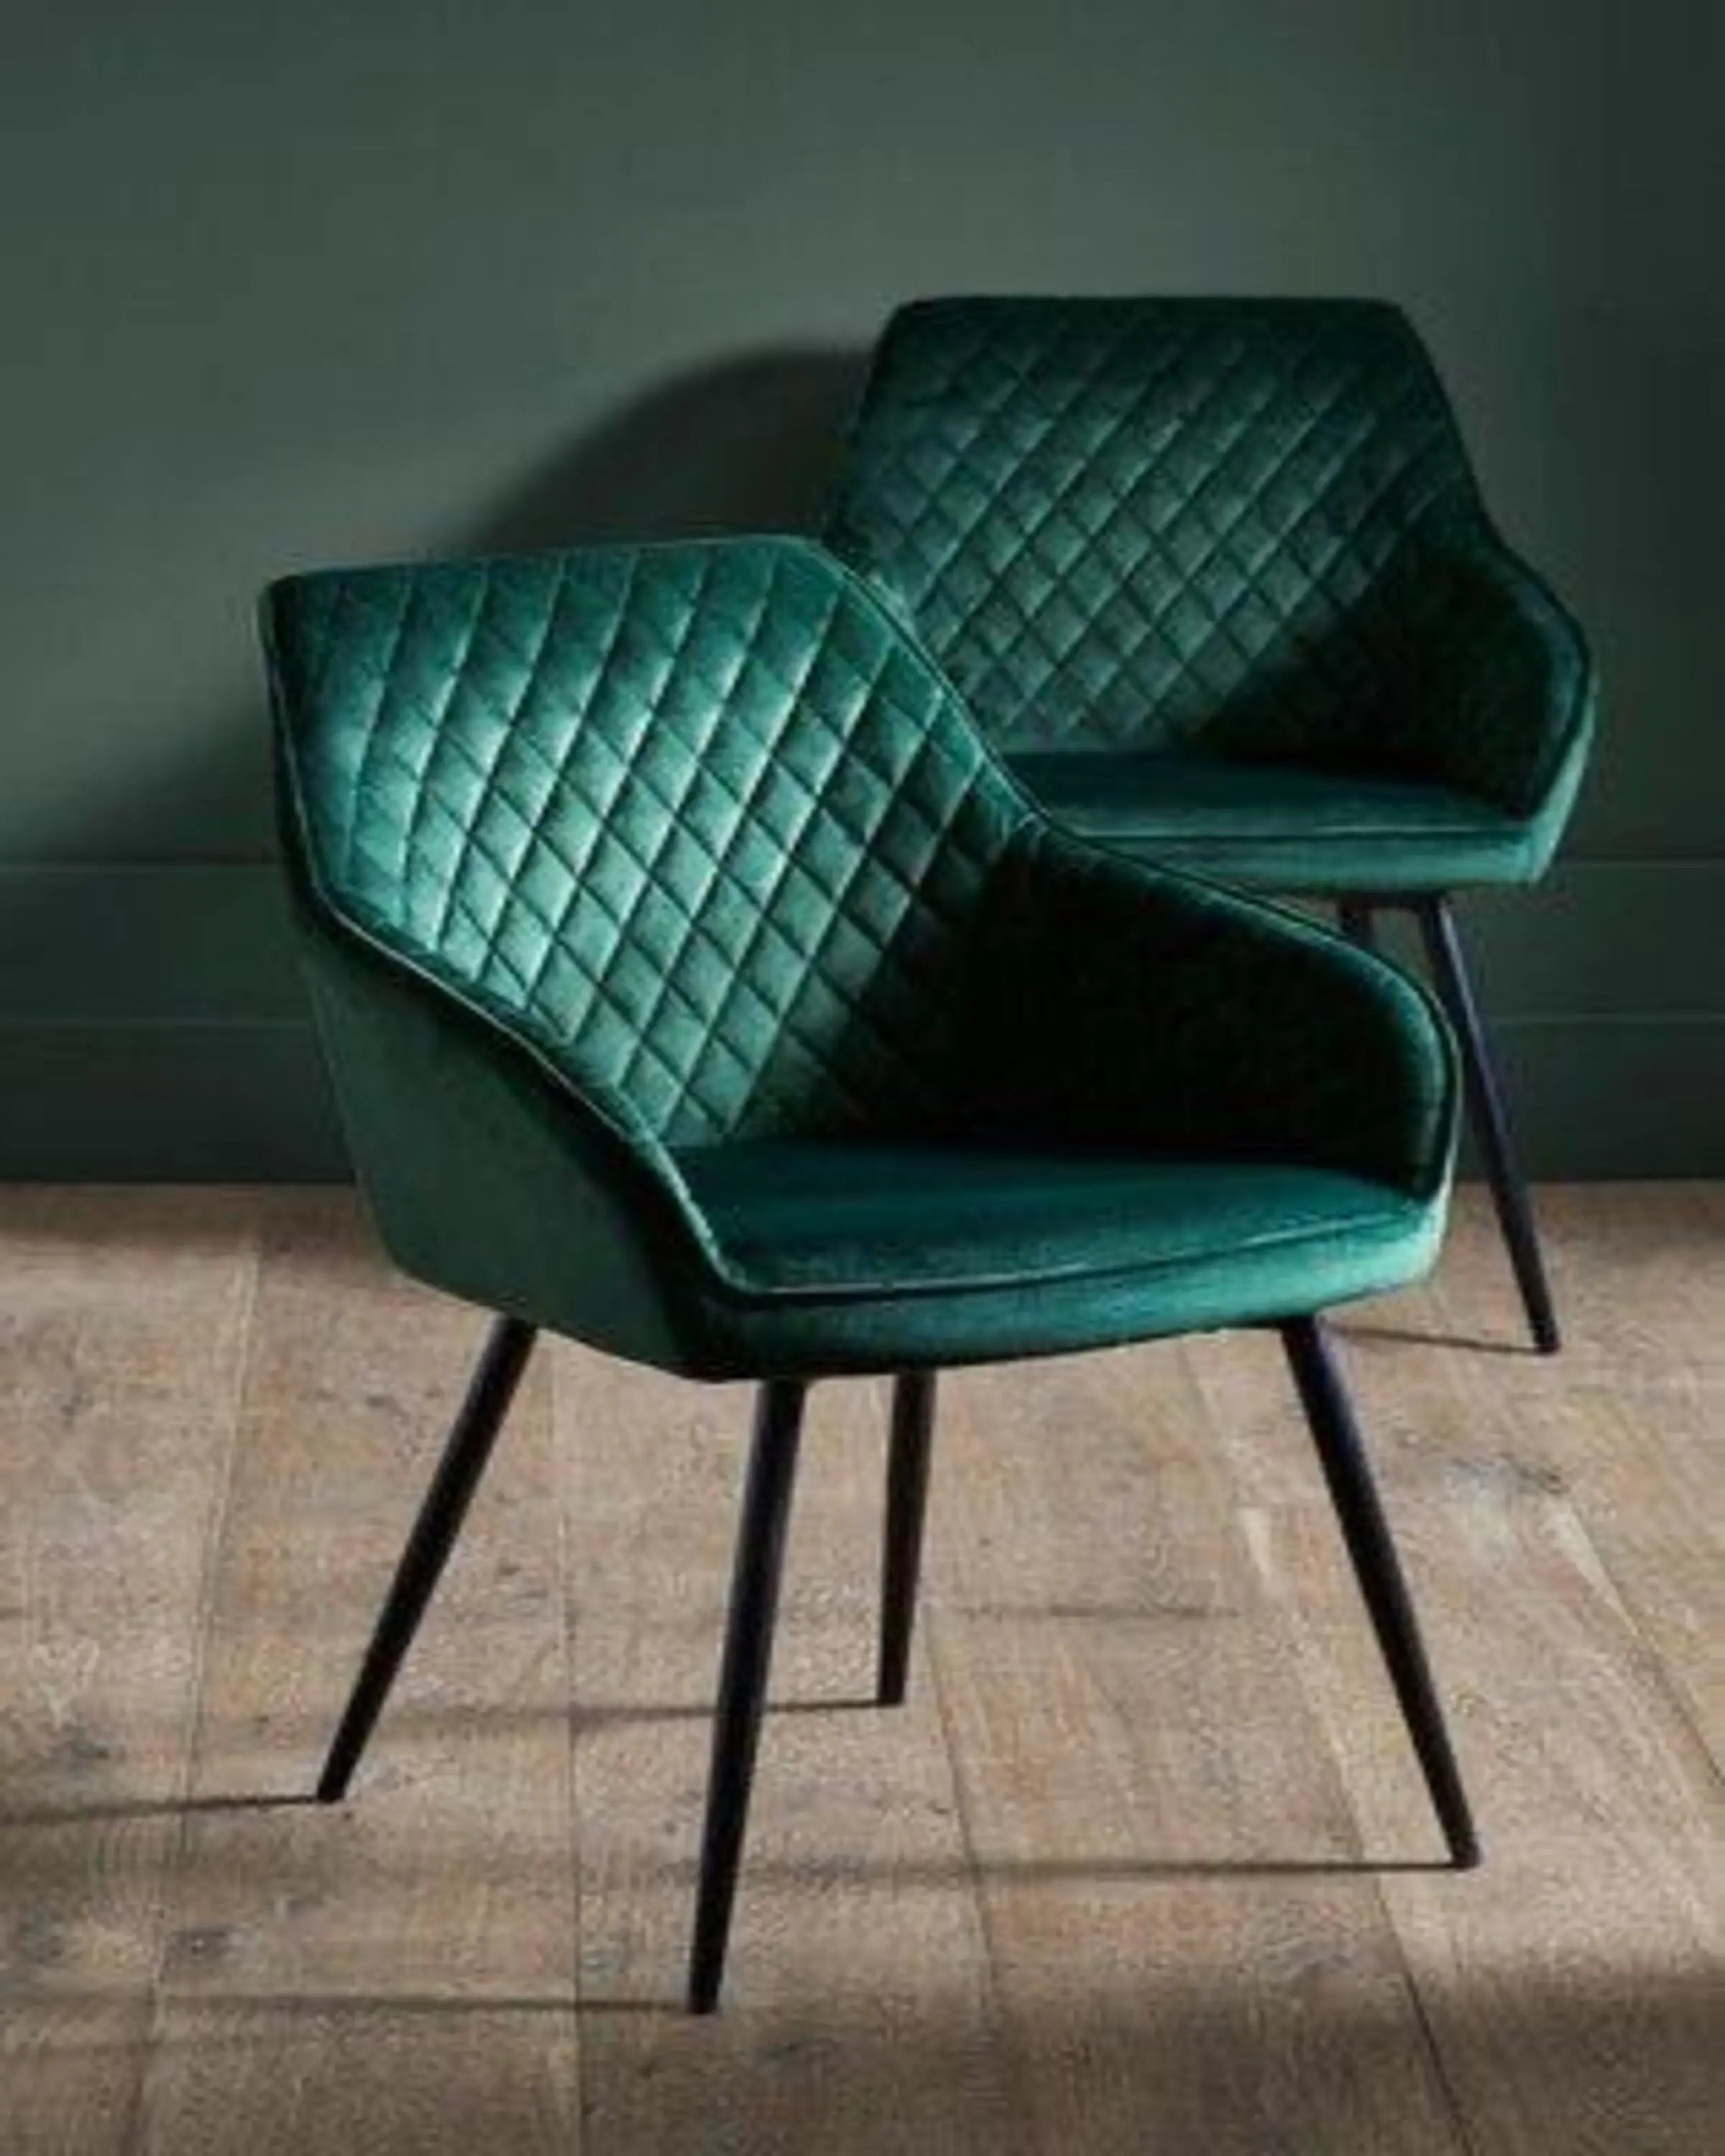 Mink 2 Set of Green Chairs ANGIE HOMES